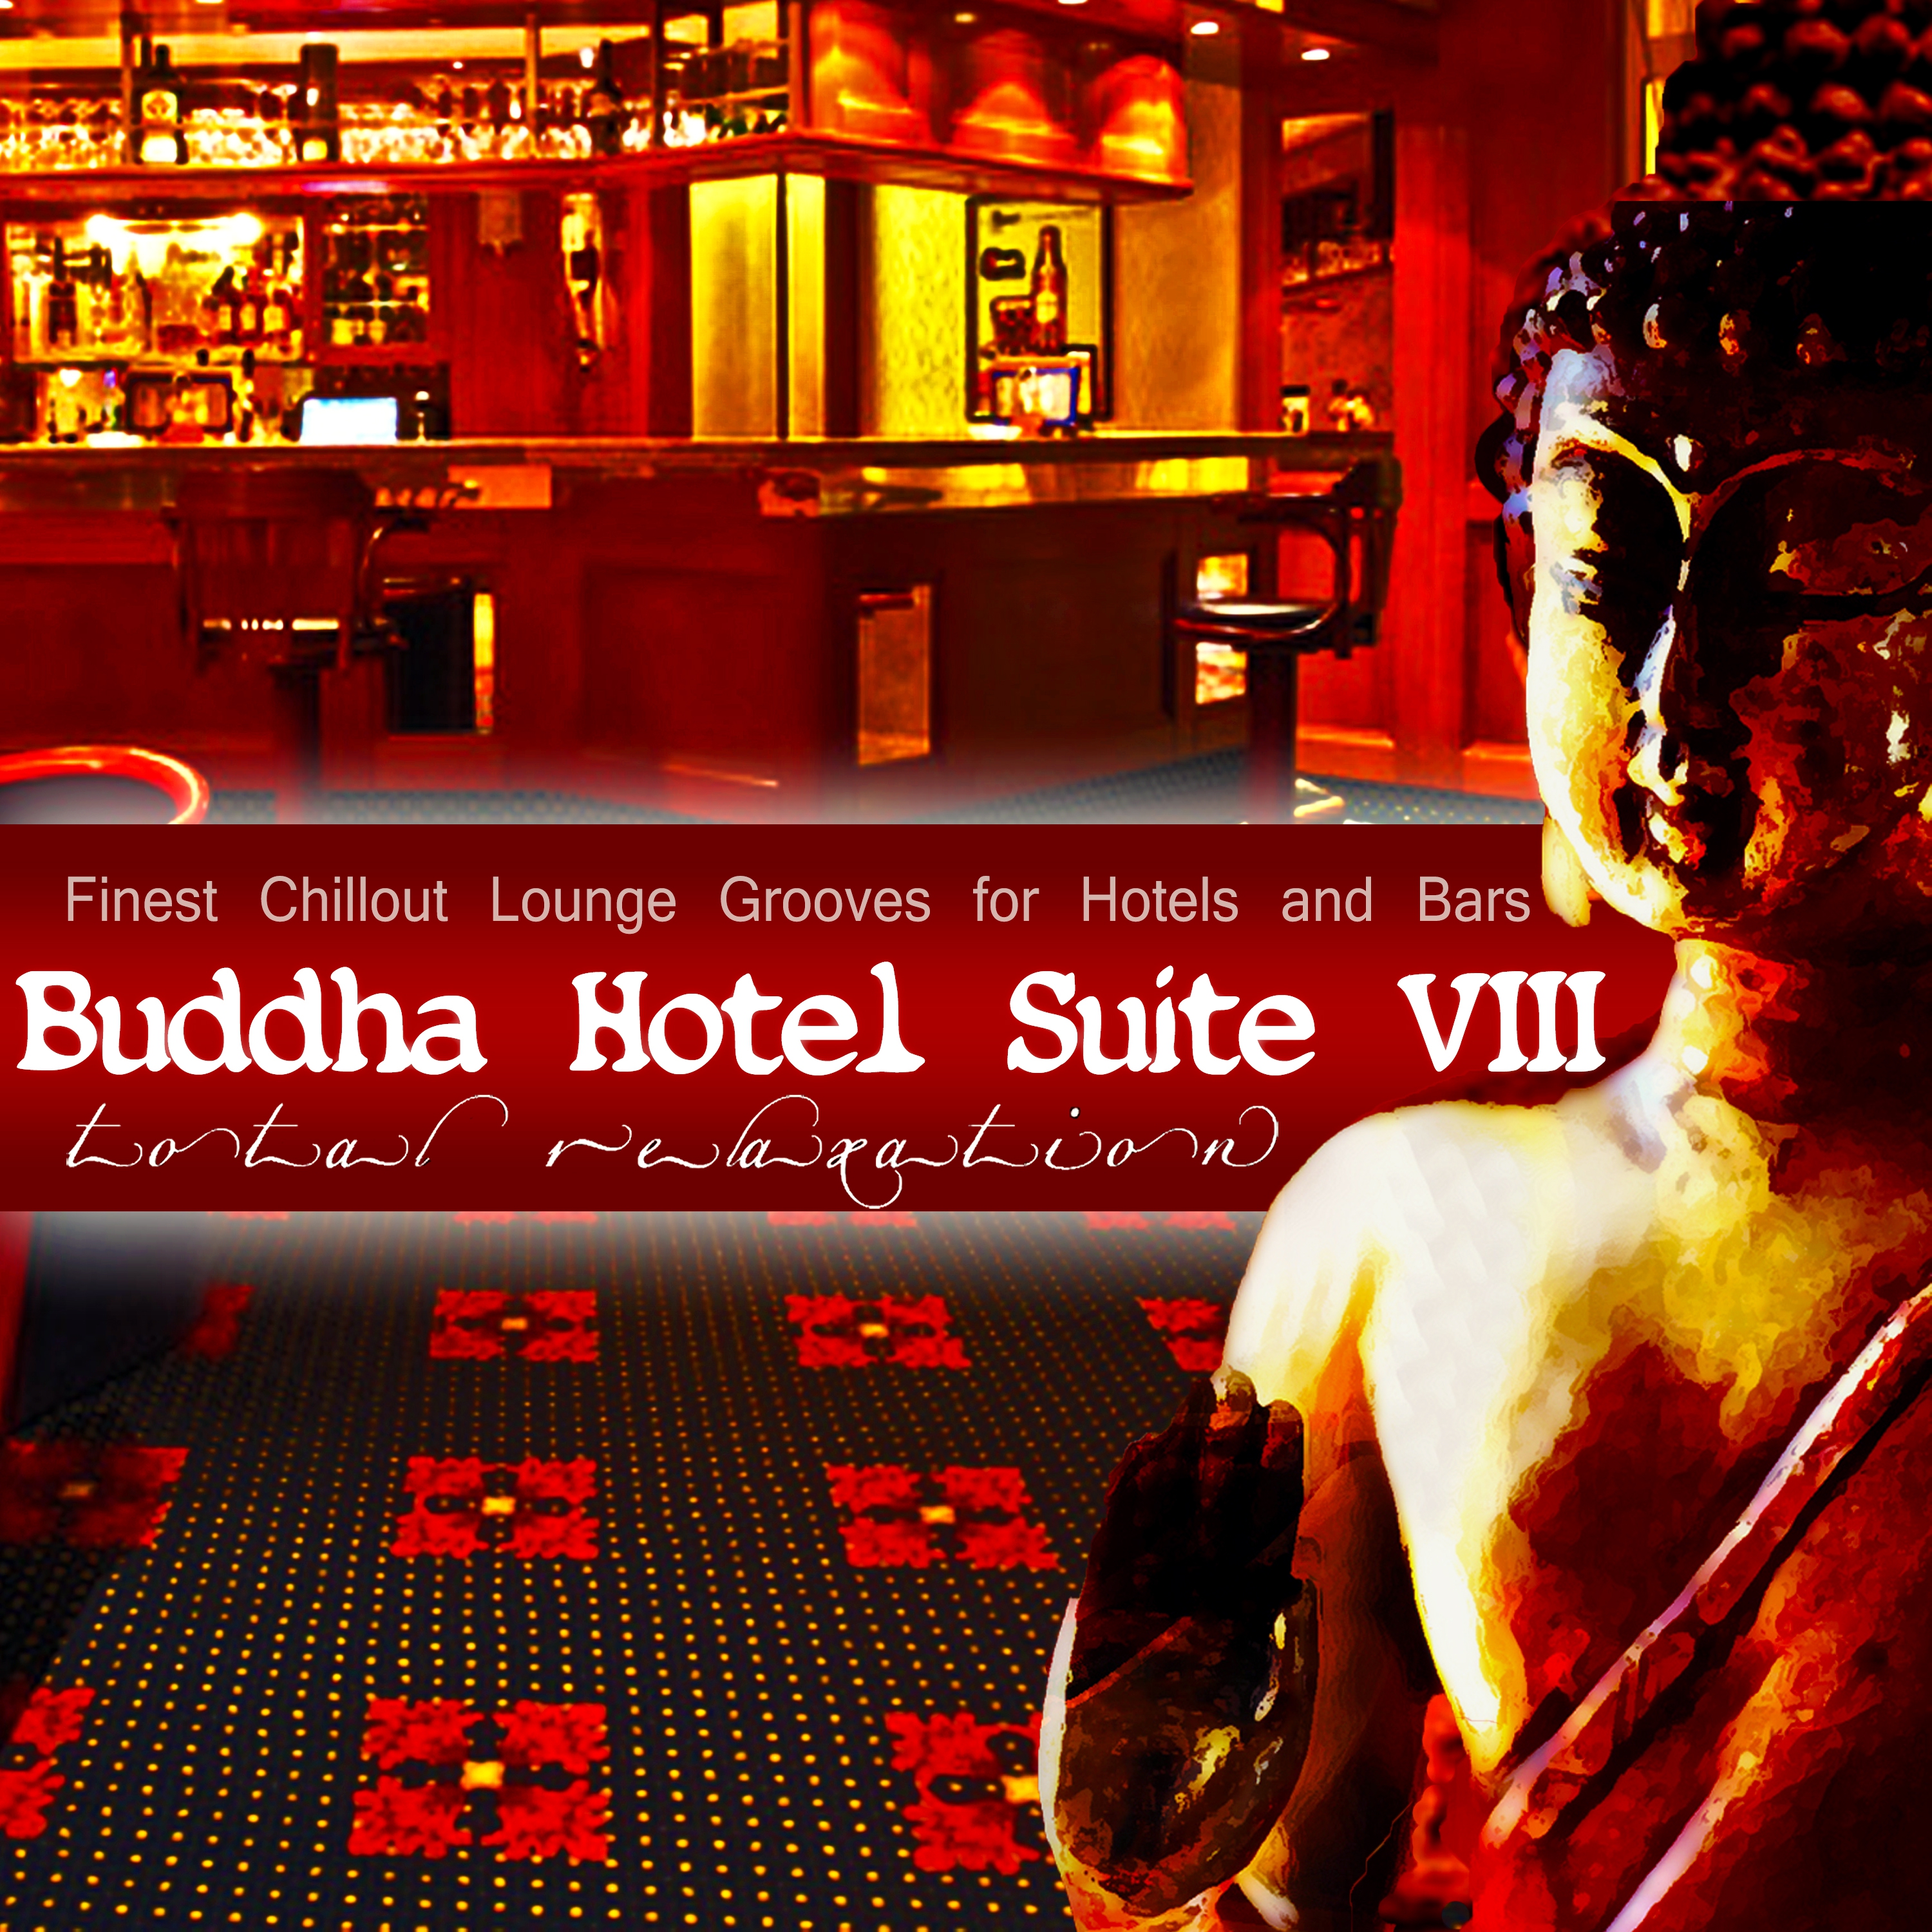 Buddha Hotel Suite, Vol. 8 - Finest Chillout Lounge Grooves for Hotels and Bars (Mixed By Mazelo Nostra)